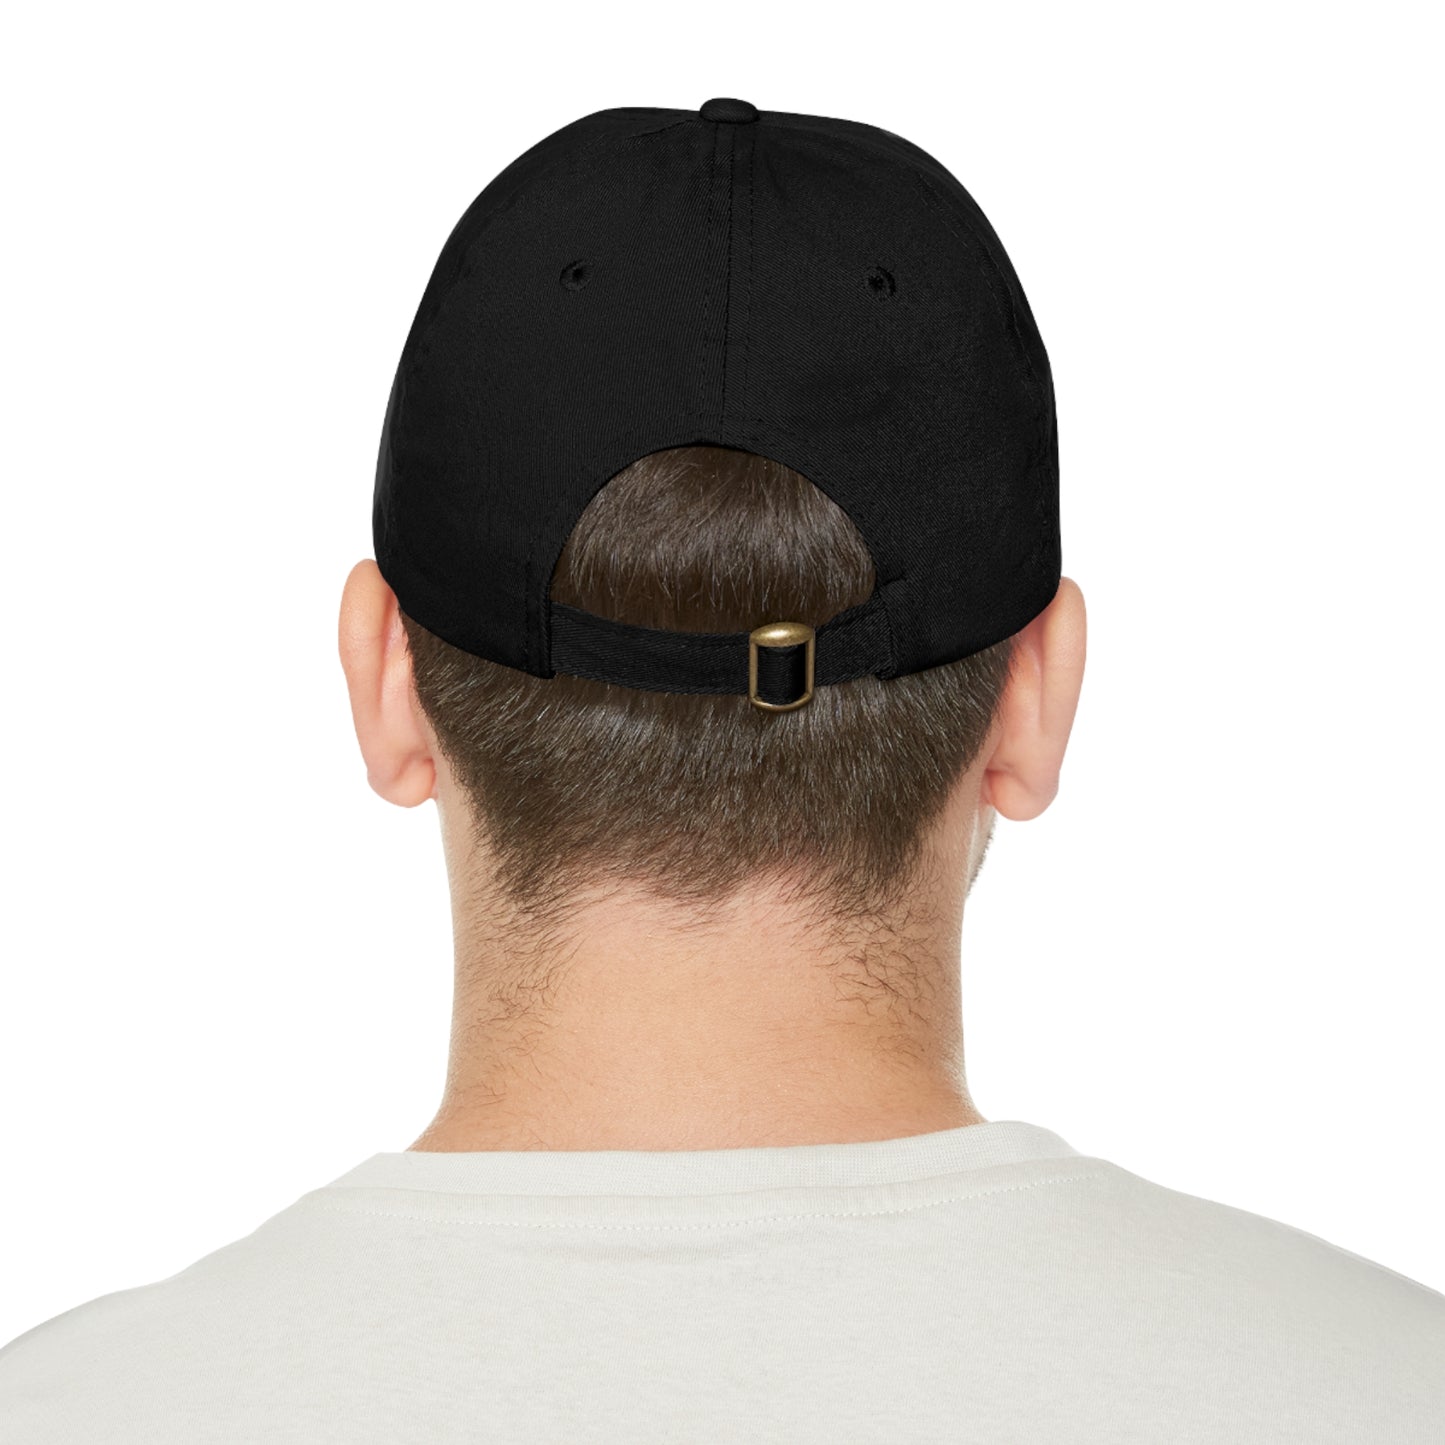 Deseret Flag Patch on a Black Cotton Twill Hat